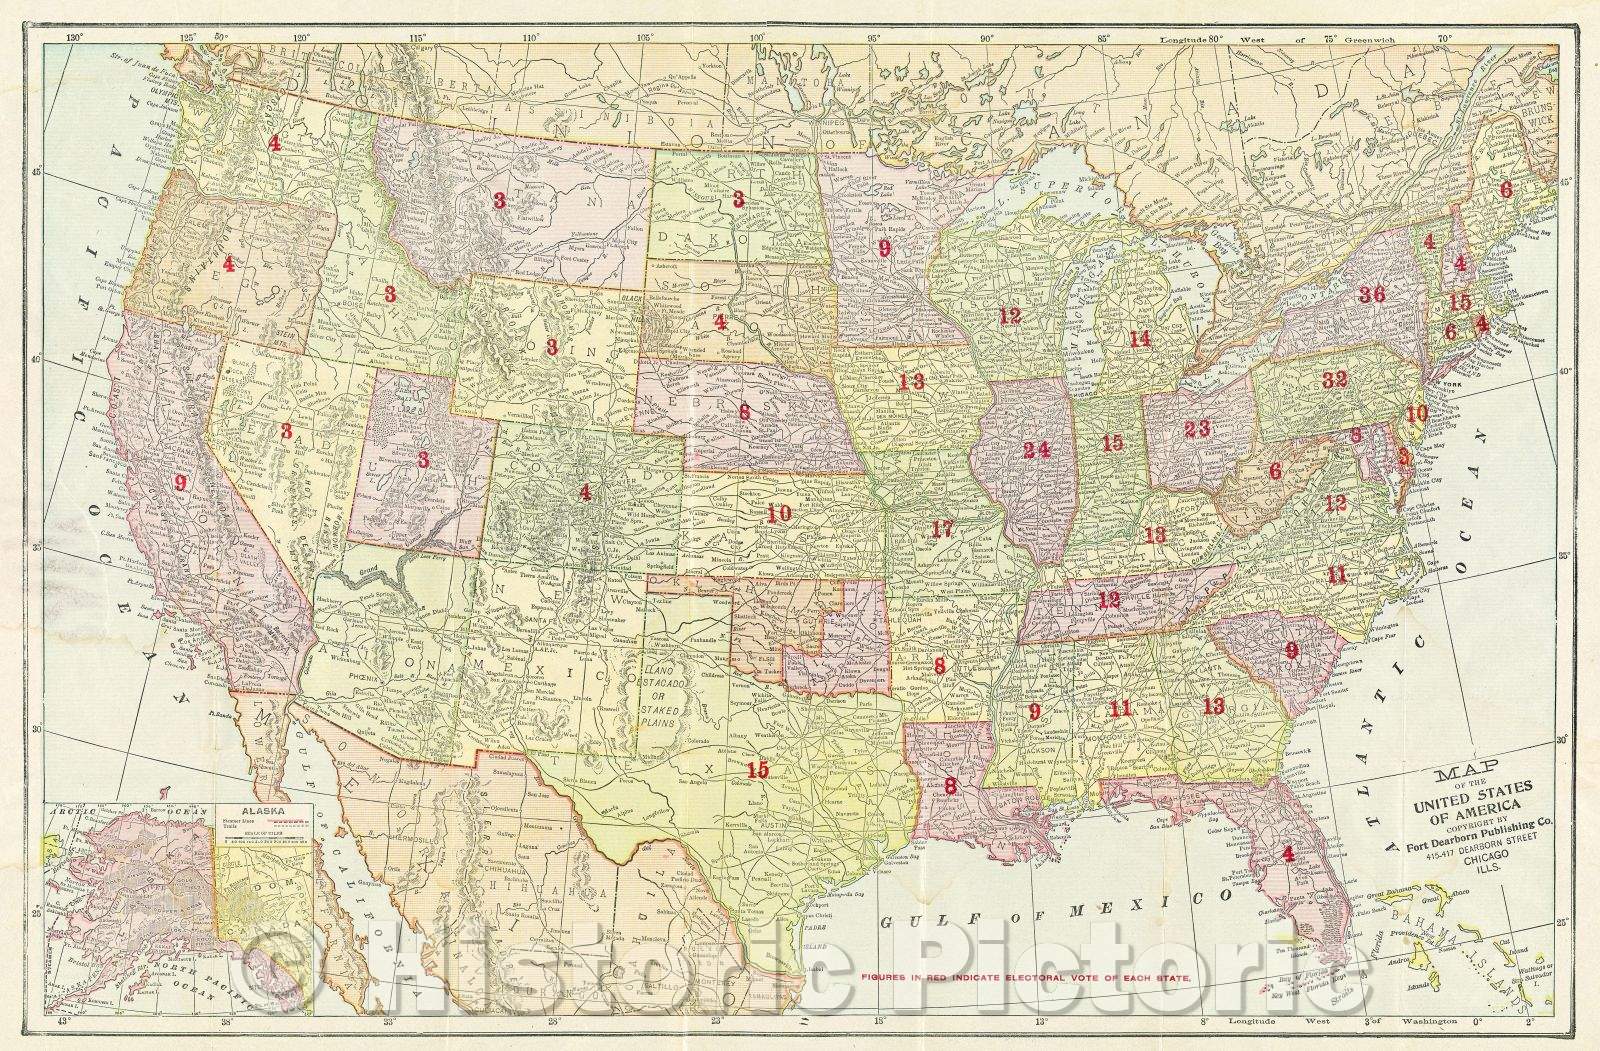 Historic Map : Map of the United States of America Copyright by Fort Dearborn Publishing Co. 415-417 Dearborn Street Chicago Ills., 1900 , Vintage Wall Art